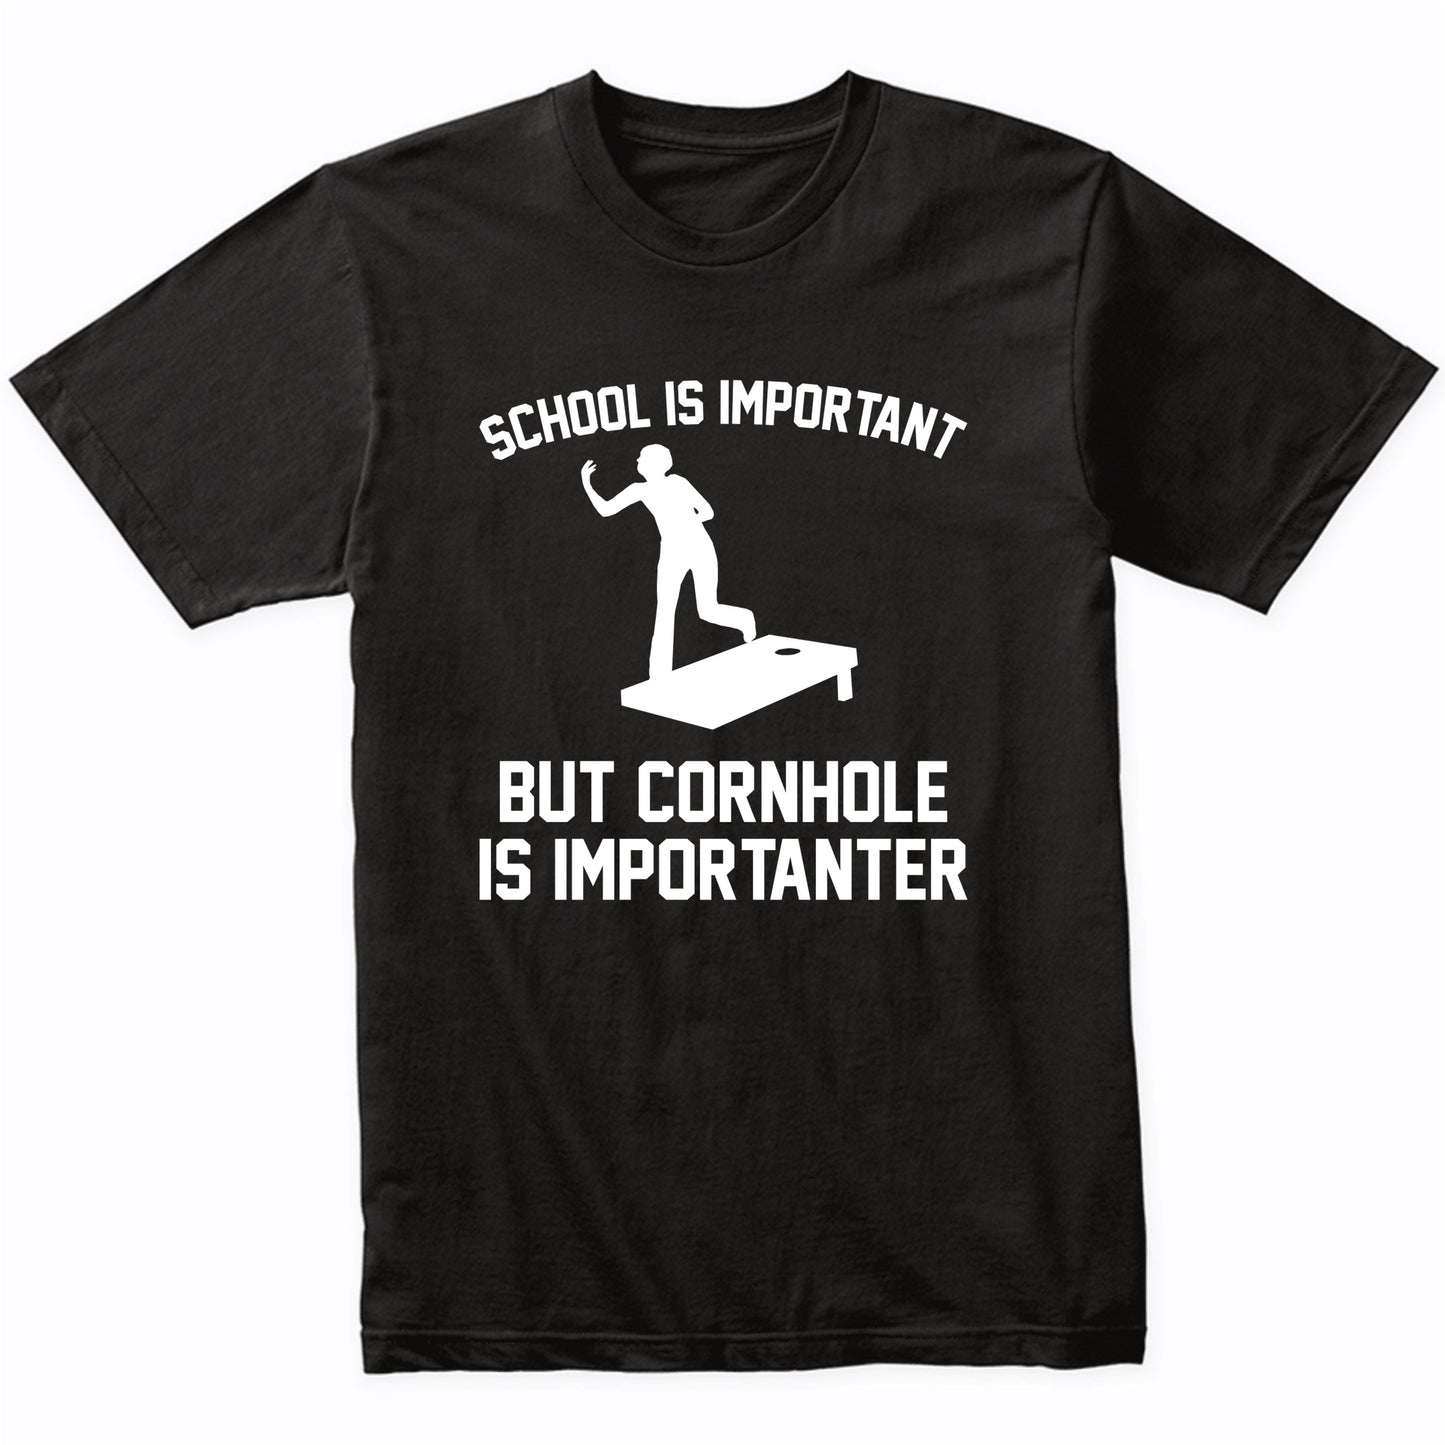 School Is Important But Cornhole Is Importanter Funny Shirt